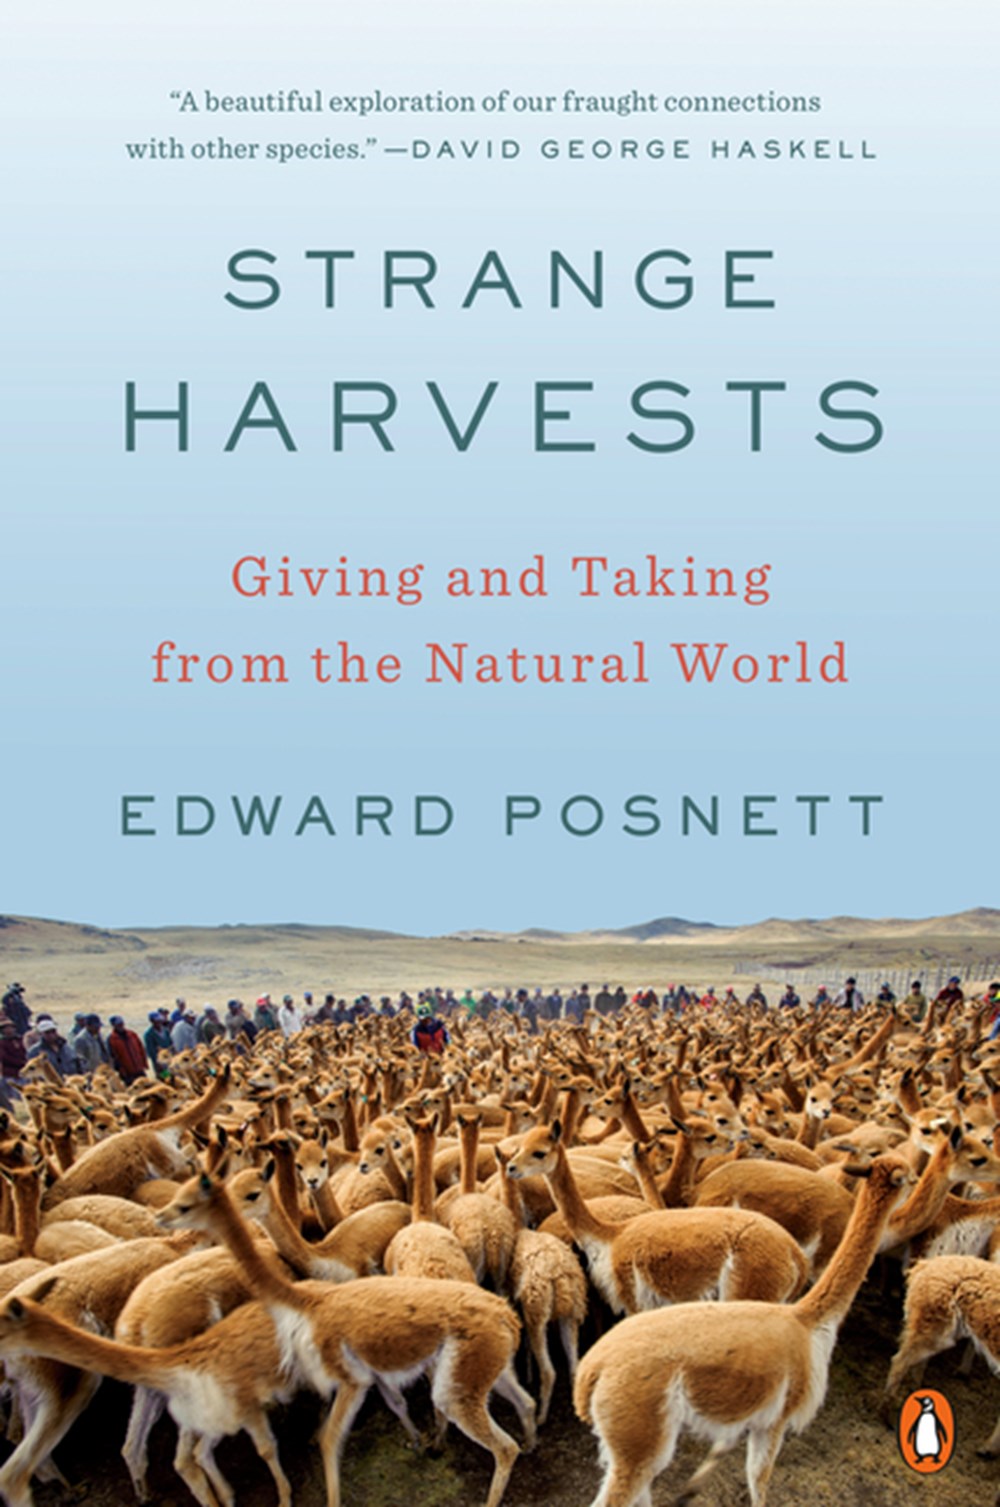 Strange Harvests: Giving and Taking from the Natural World